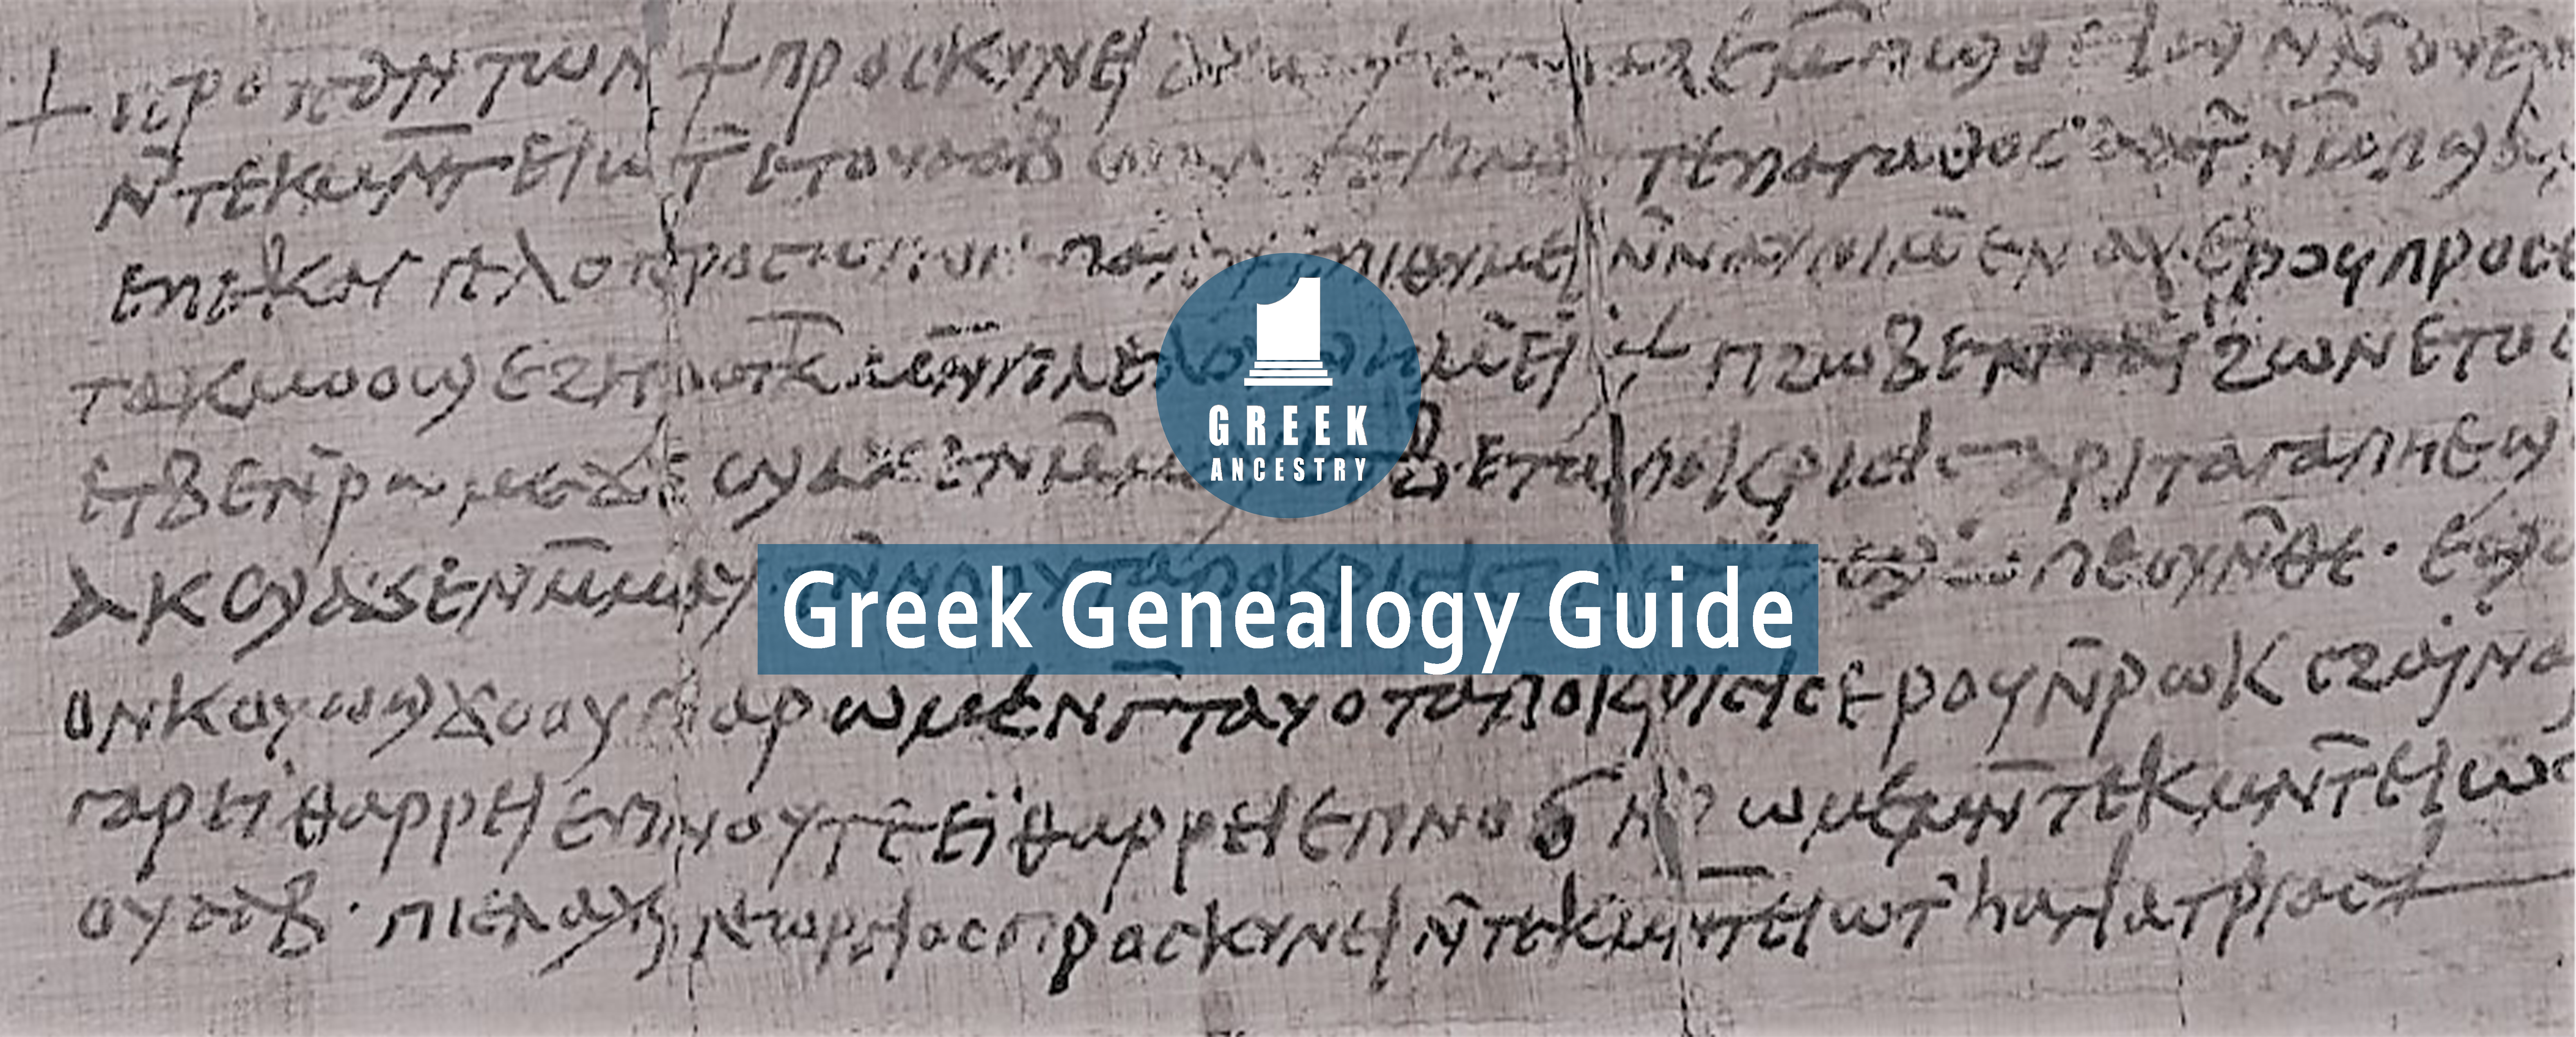 Introducing the Greek Genealogy Guide